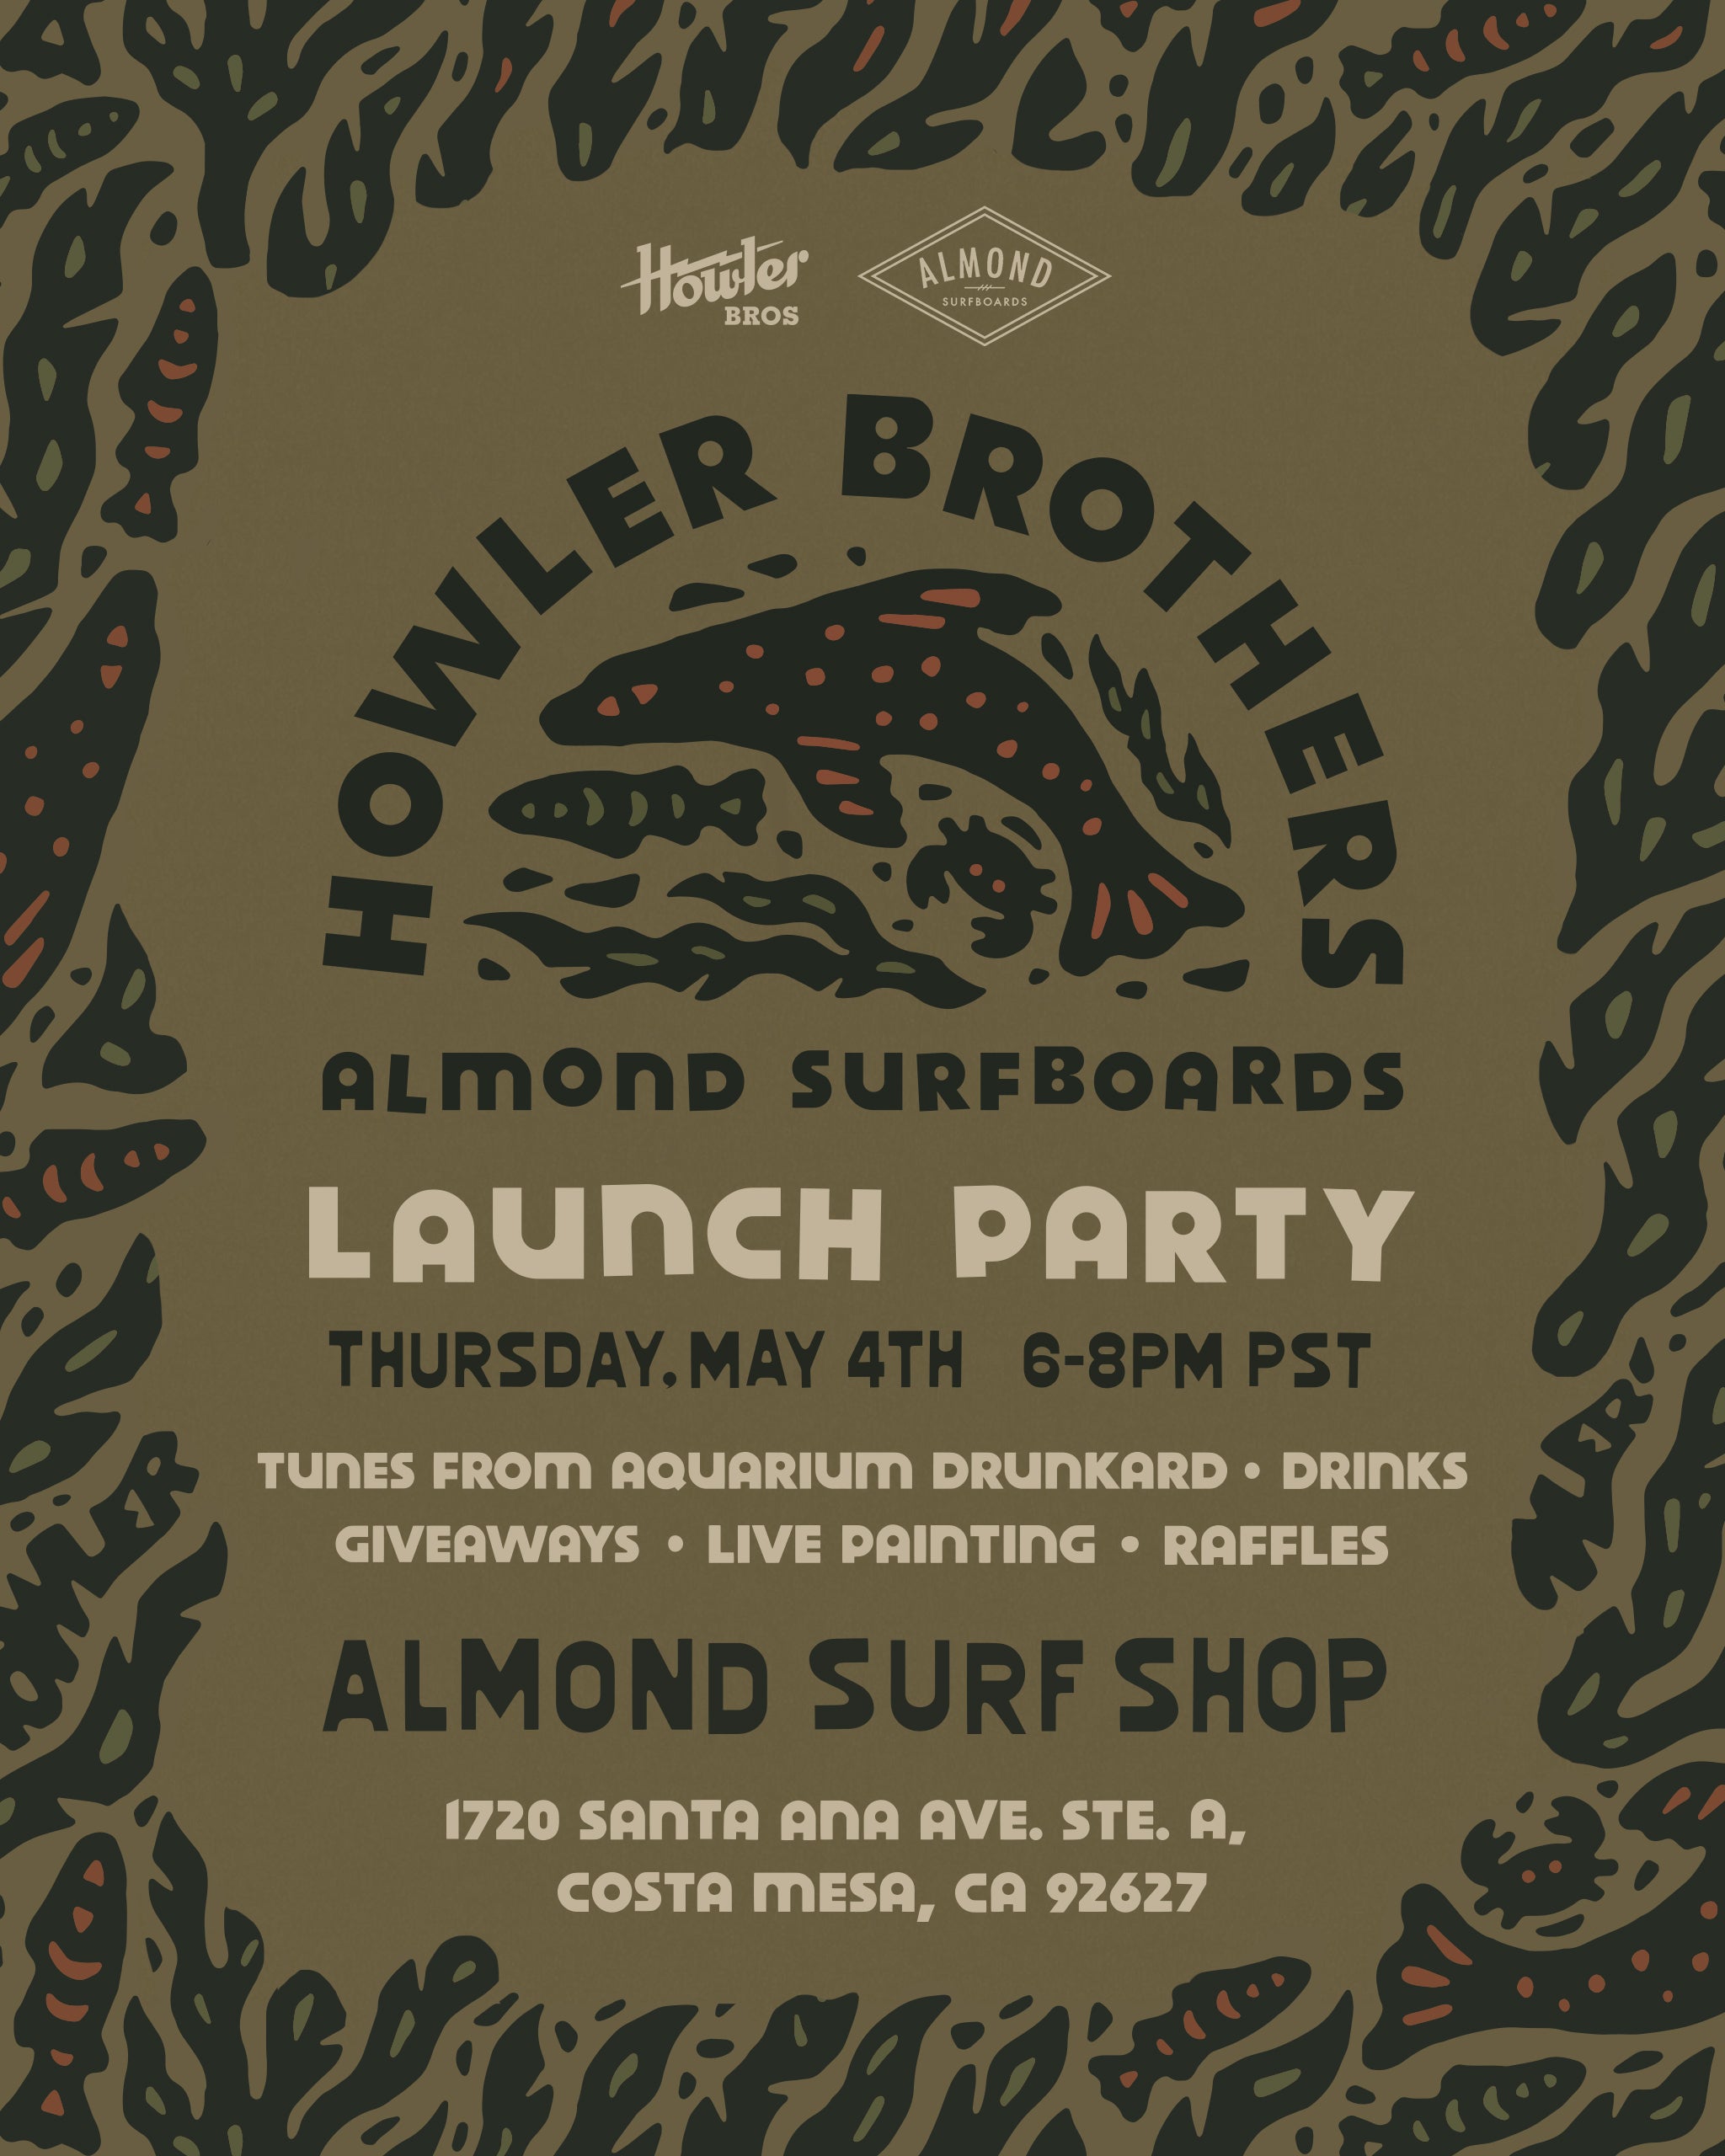 Almond x Howler Bros Event | May 4th